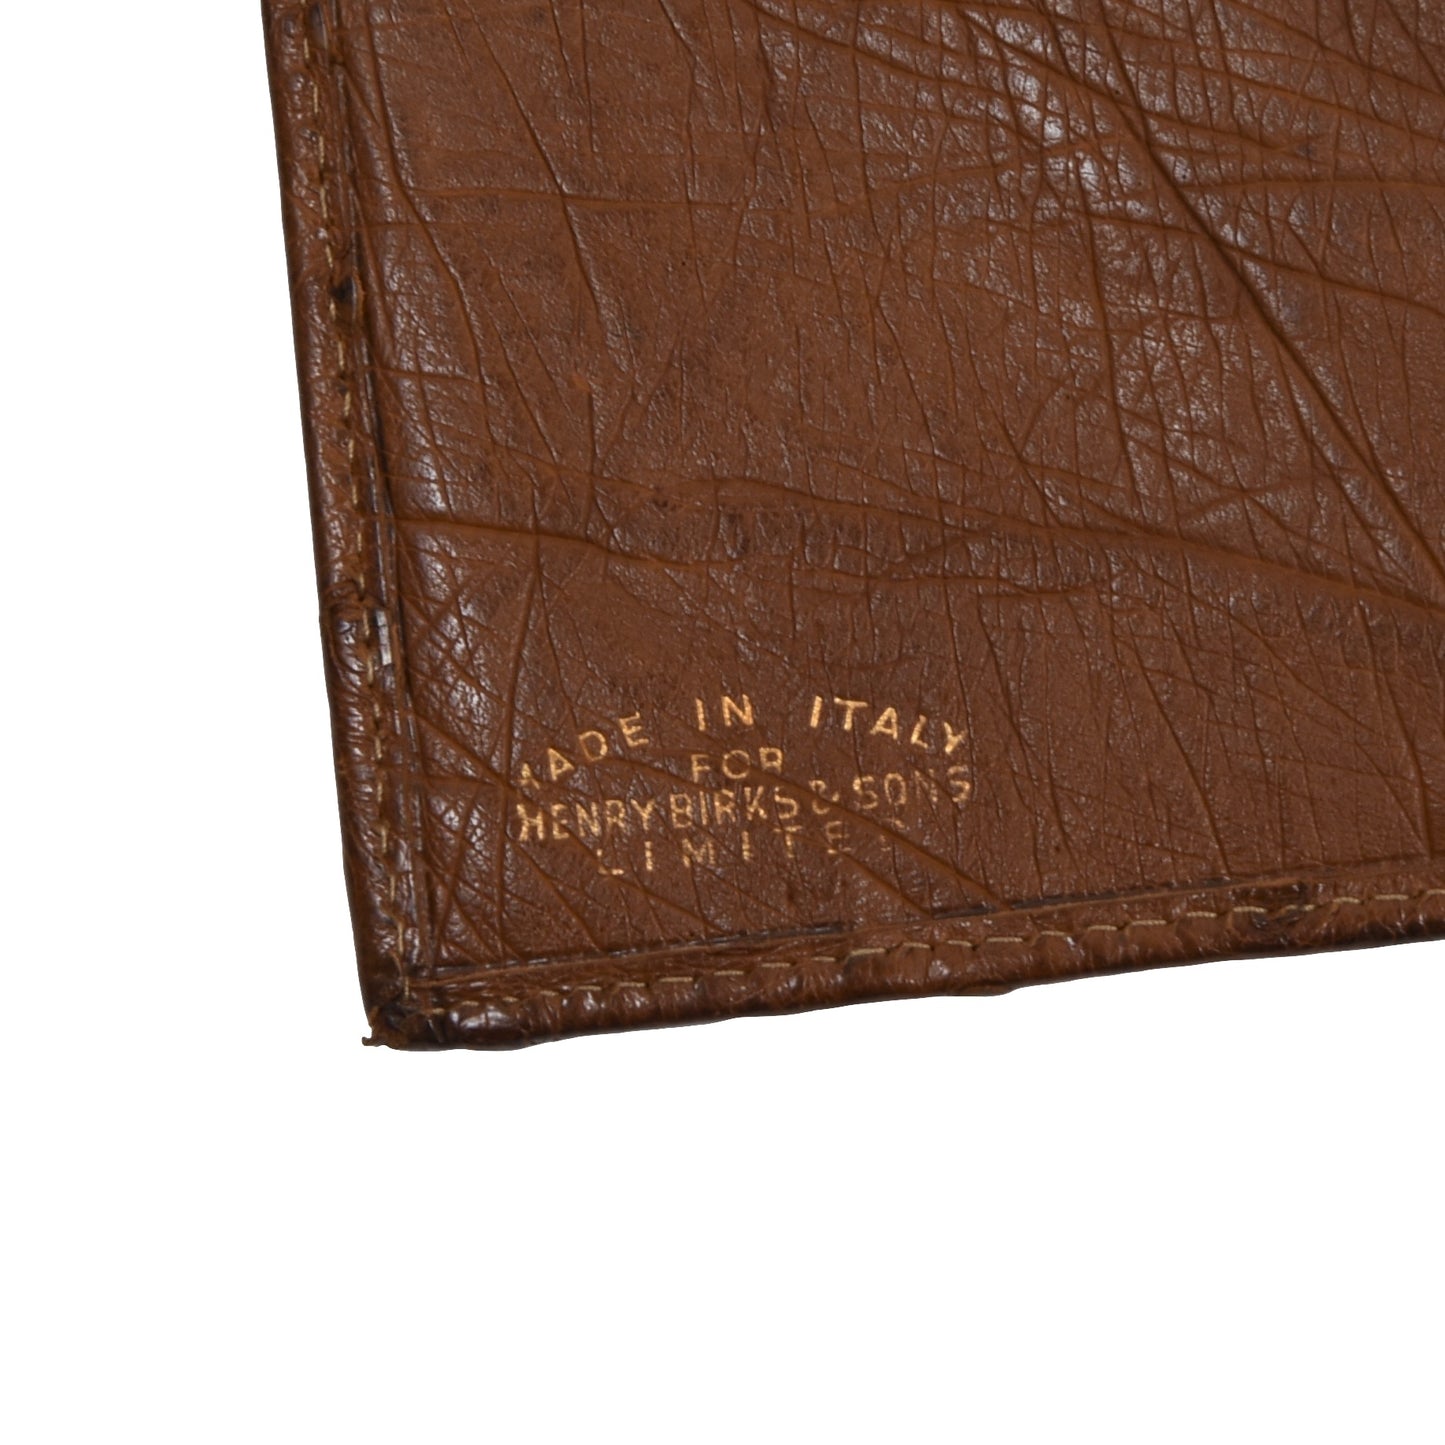 Henry Birks & Sons Ostrich Leather Travel Wallet - Brown